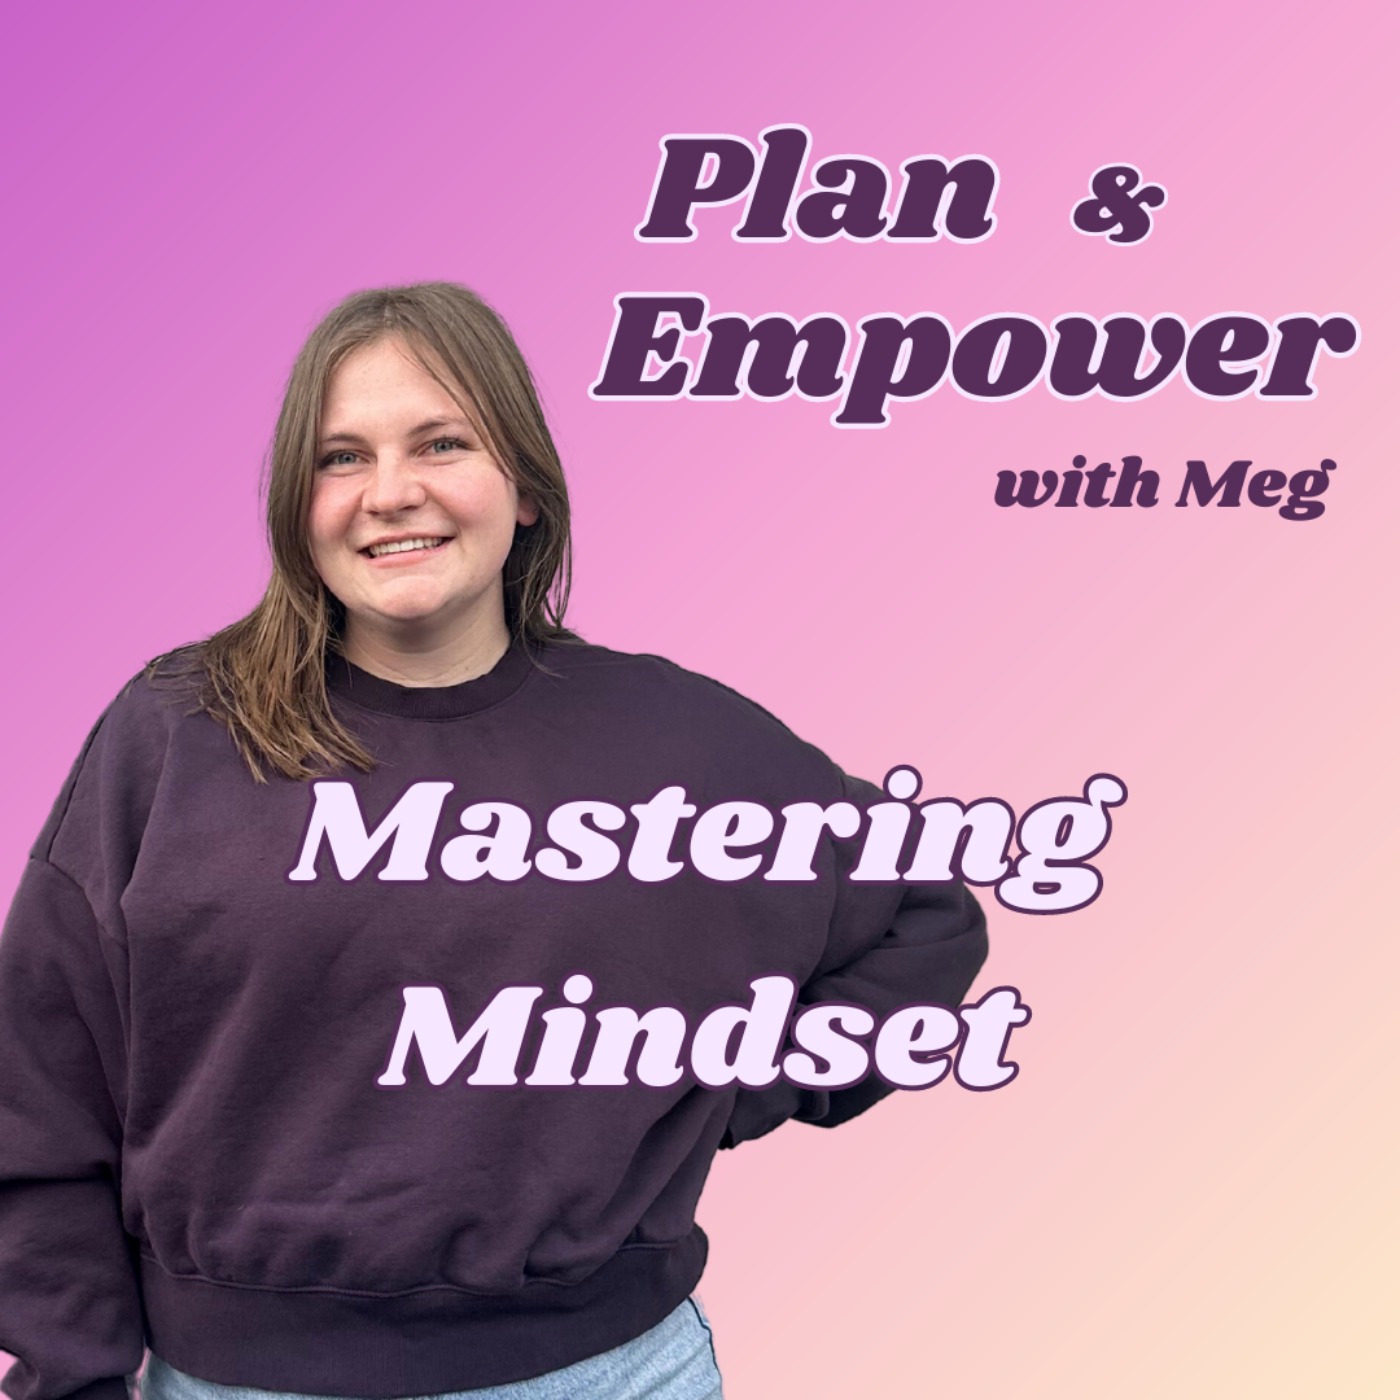 Mastering Mindset: Part 3 - Confidence Through Action